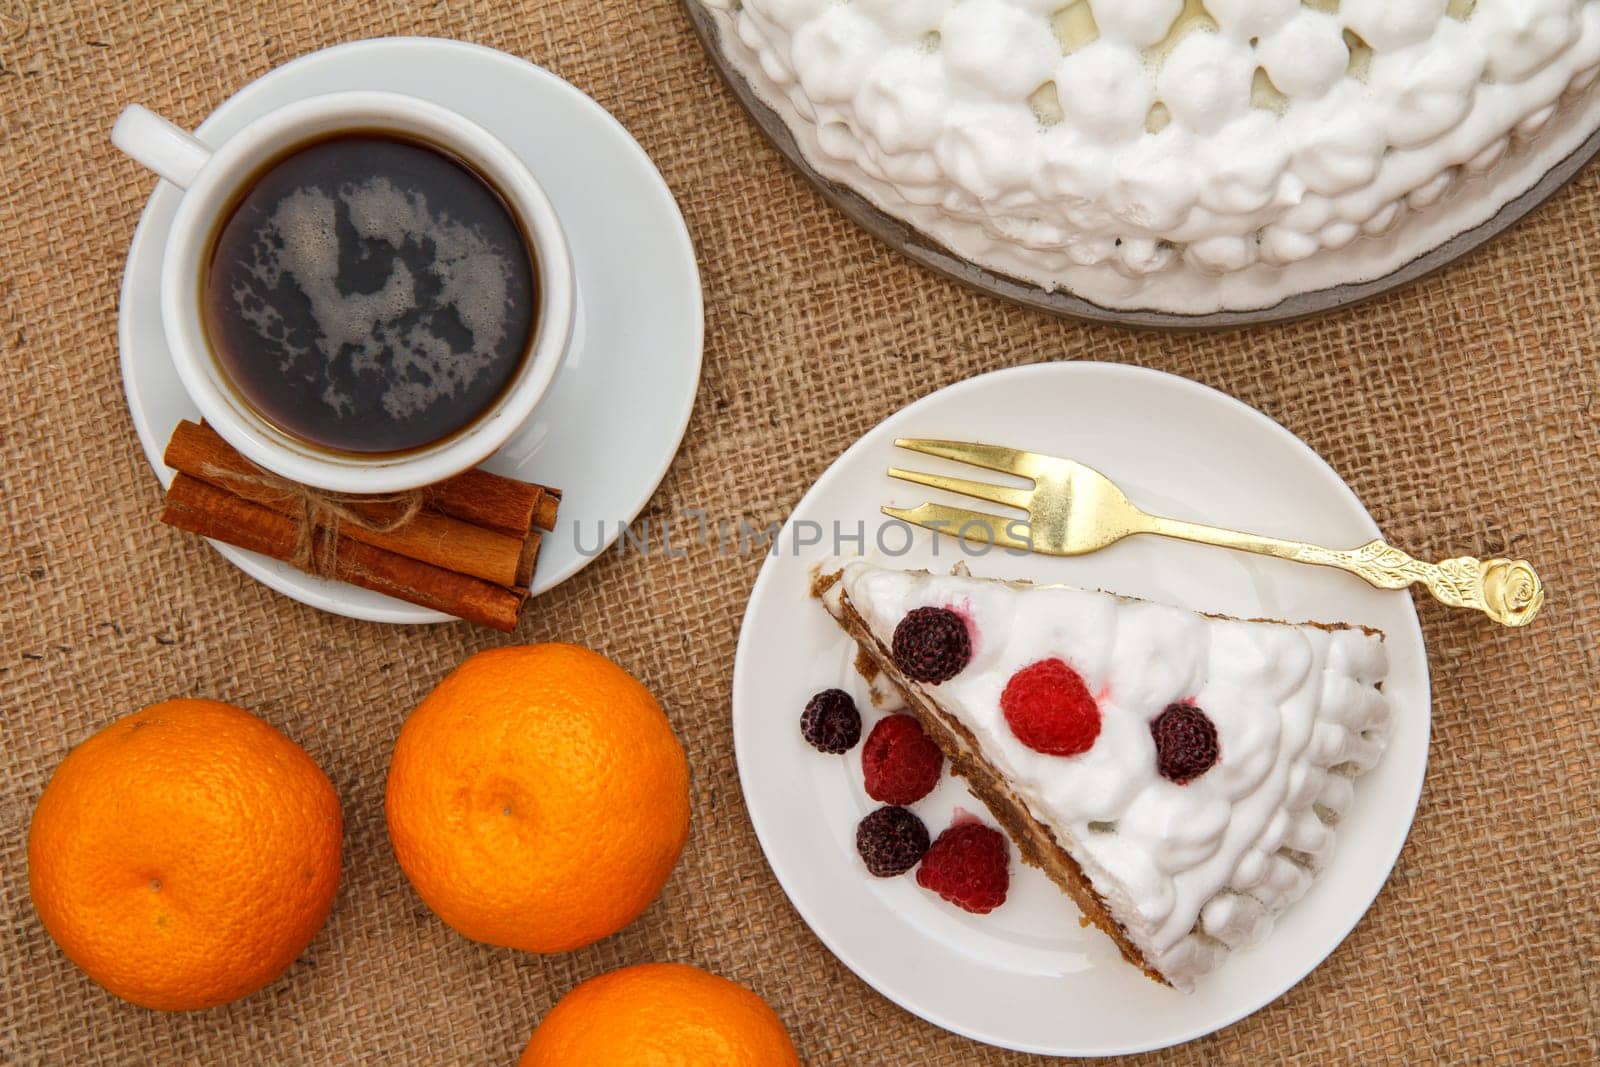 Cup of coffee, cinnamon, fork and slice of biscuit cake decorated with whipped cream and raspberries. by mvg6894